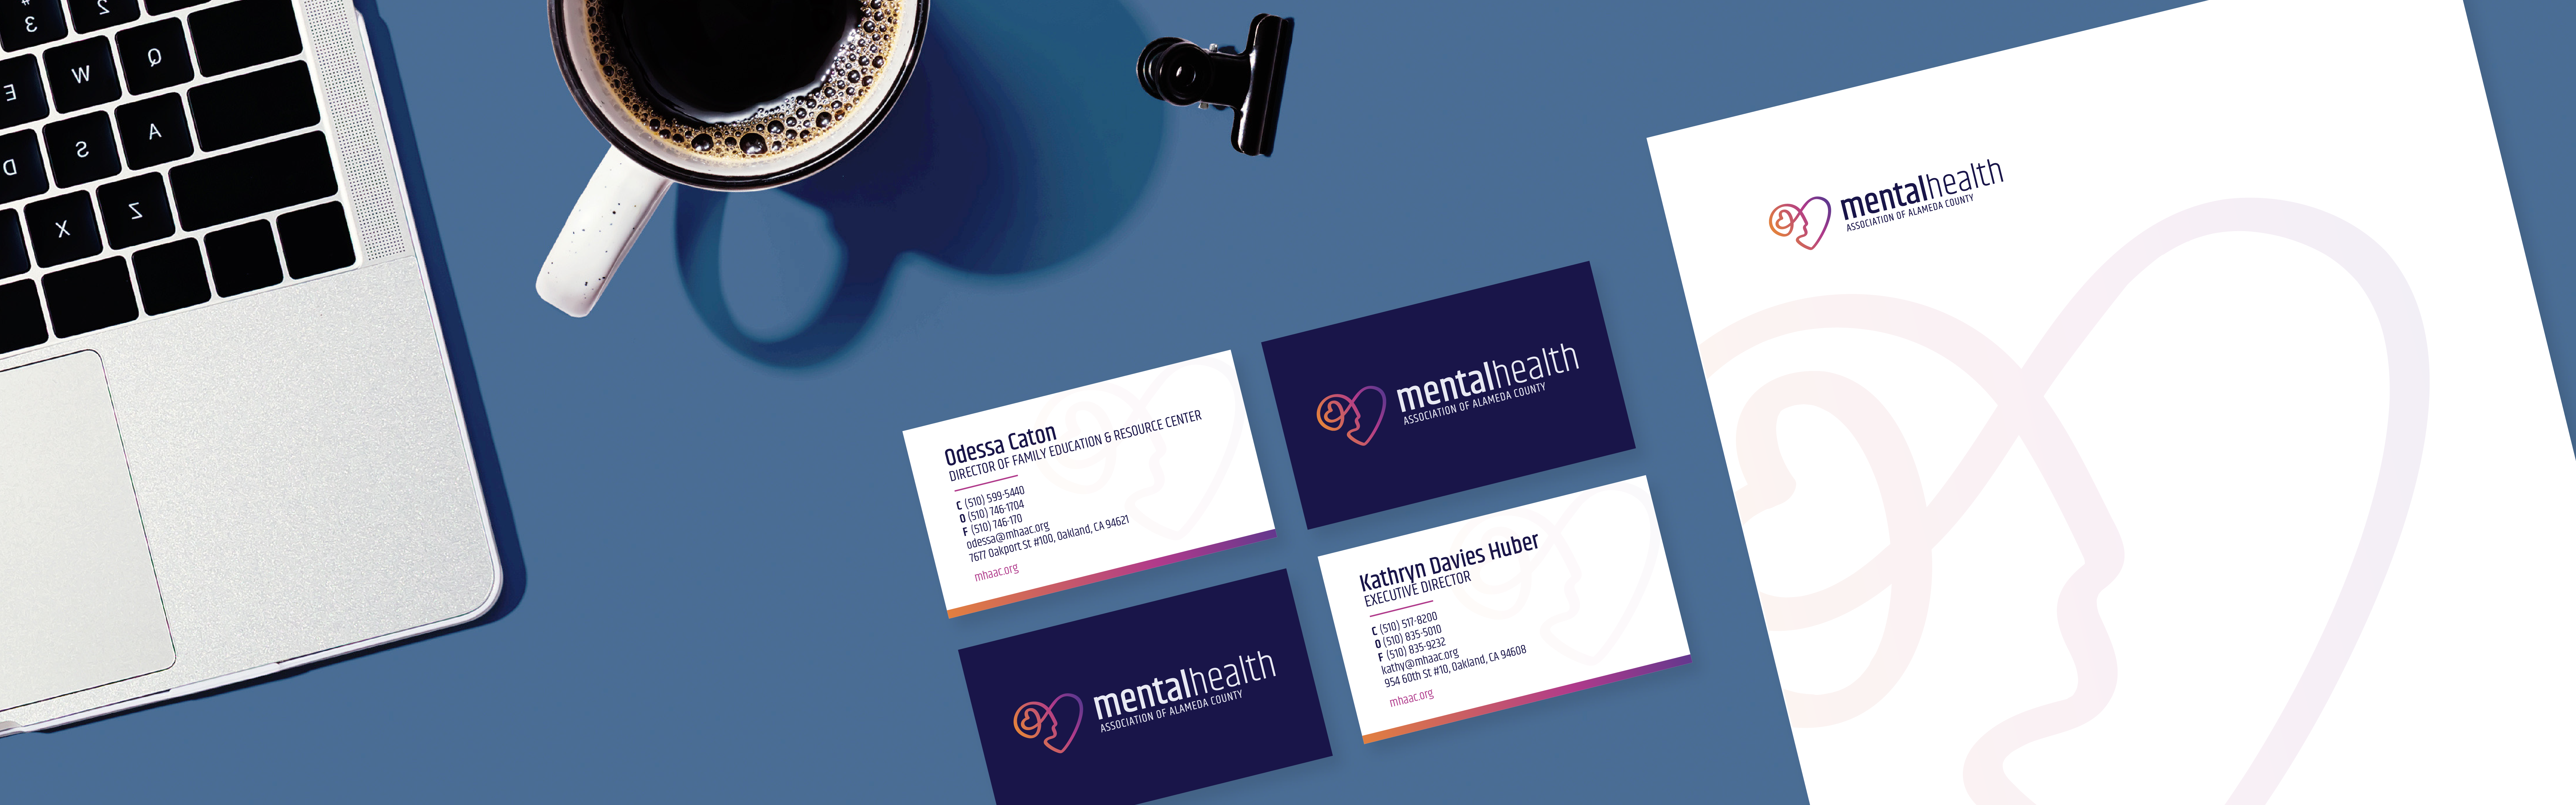 A neatly arranged workspace featuring a laptop, a cup of coffee, business cards, and stationery with Mental Health Association branding materials.